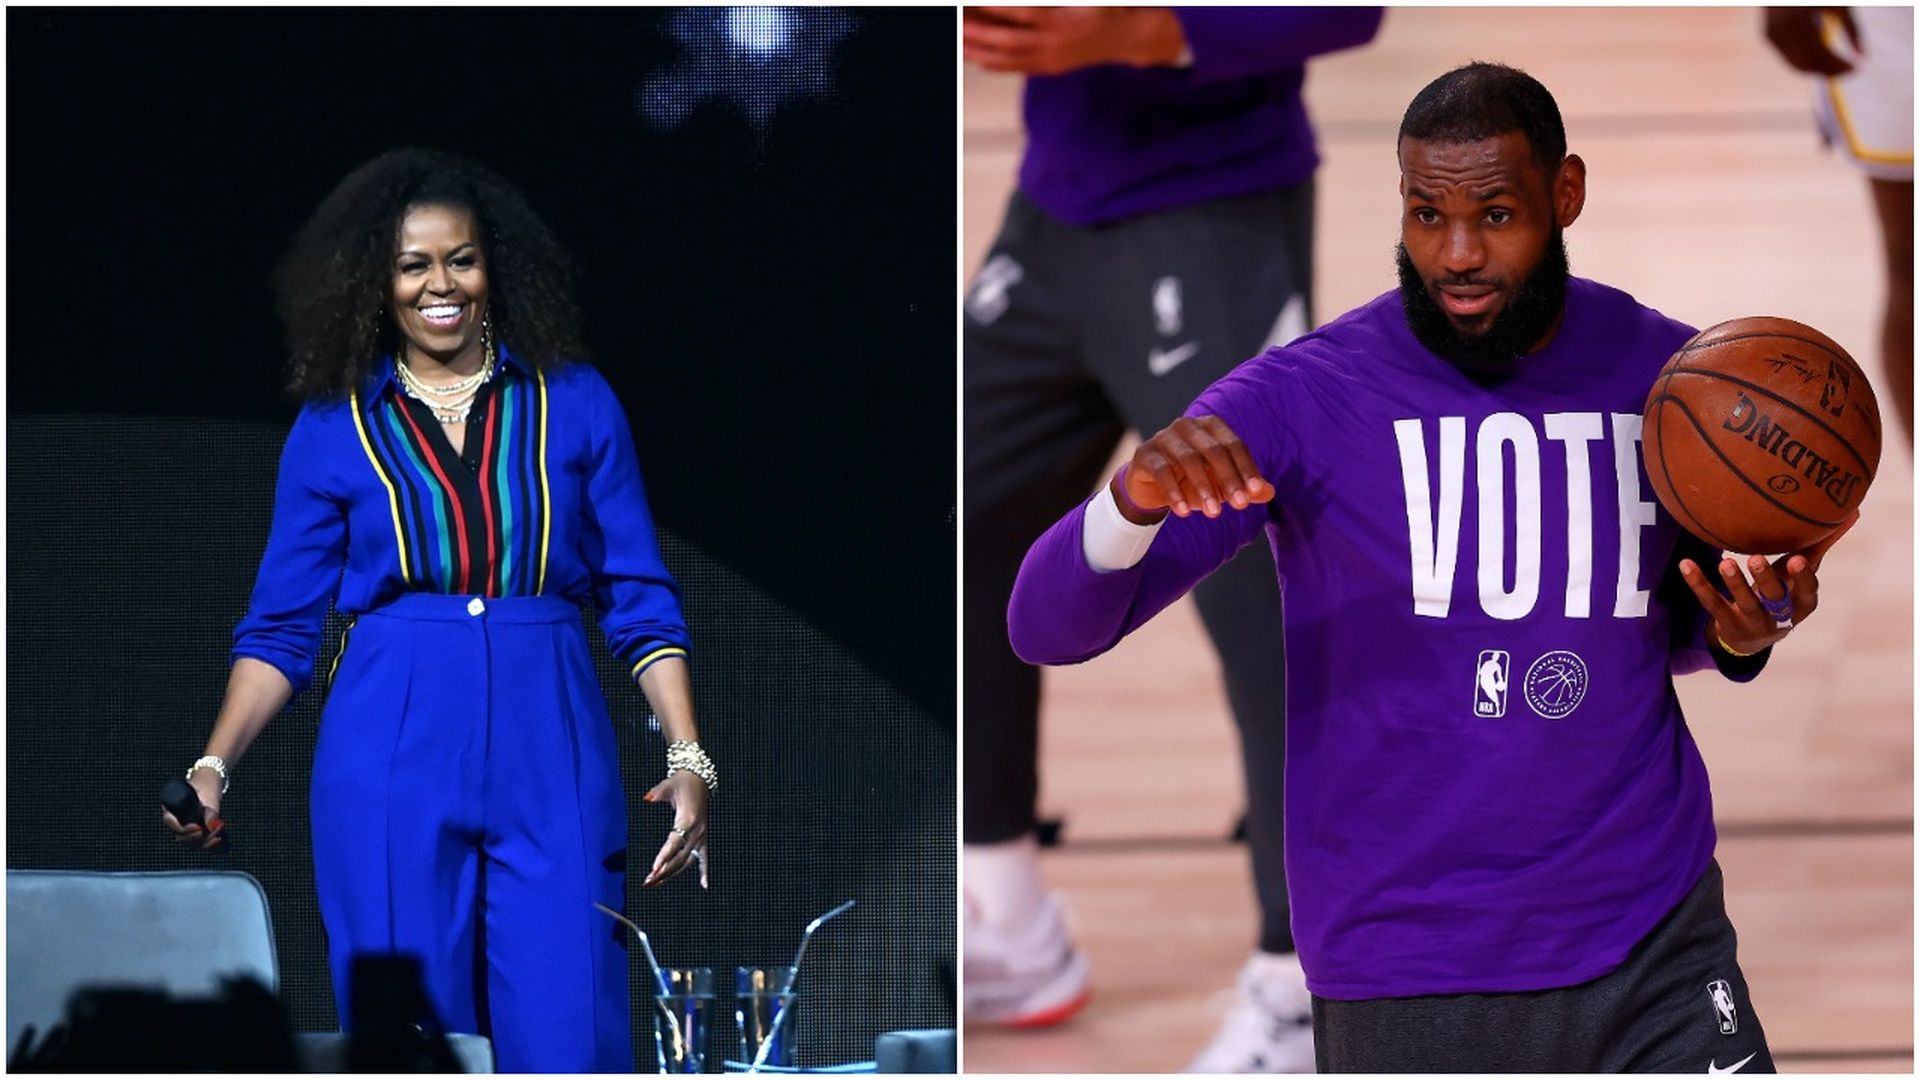 Combination images of former first lady Michelle Obama and NBA star LeBron James.